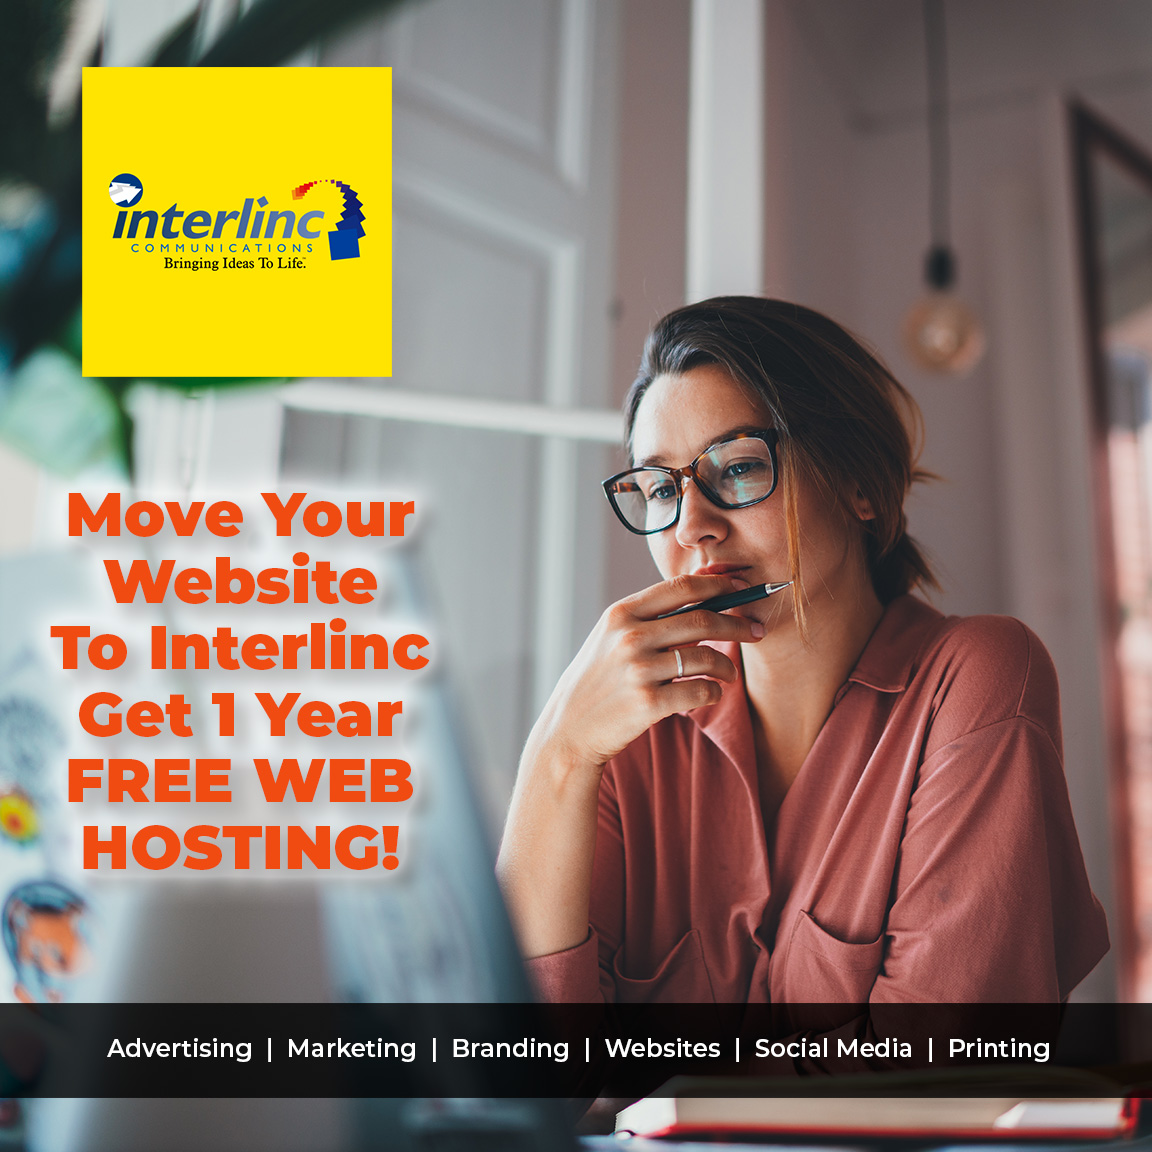 Transfer your website to Interlinc Communications and get 1 year of free web site hosting.